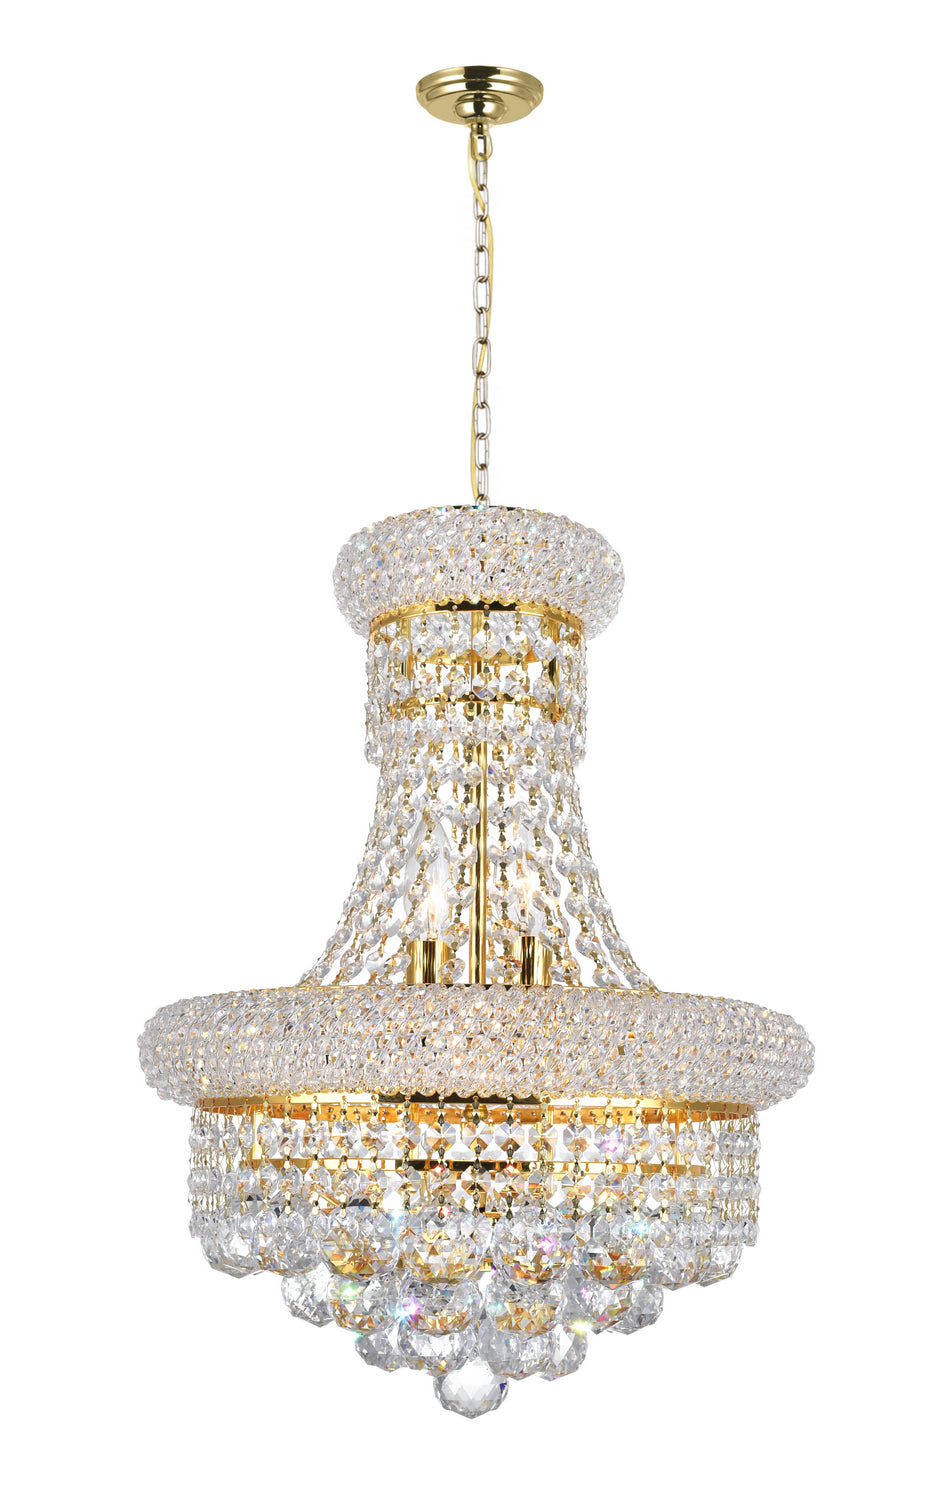 CWI Lighting Six Light Chandelier from the Empire collection in Gold finish